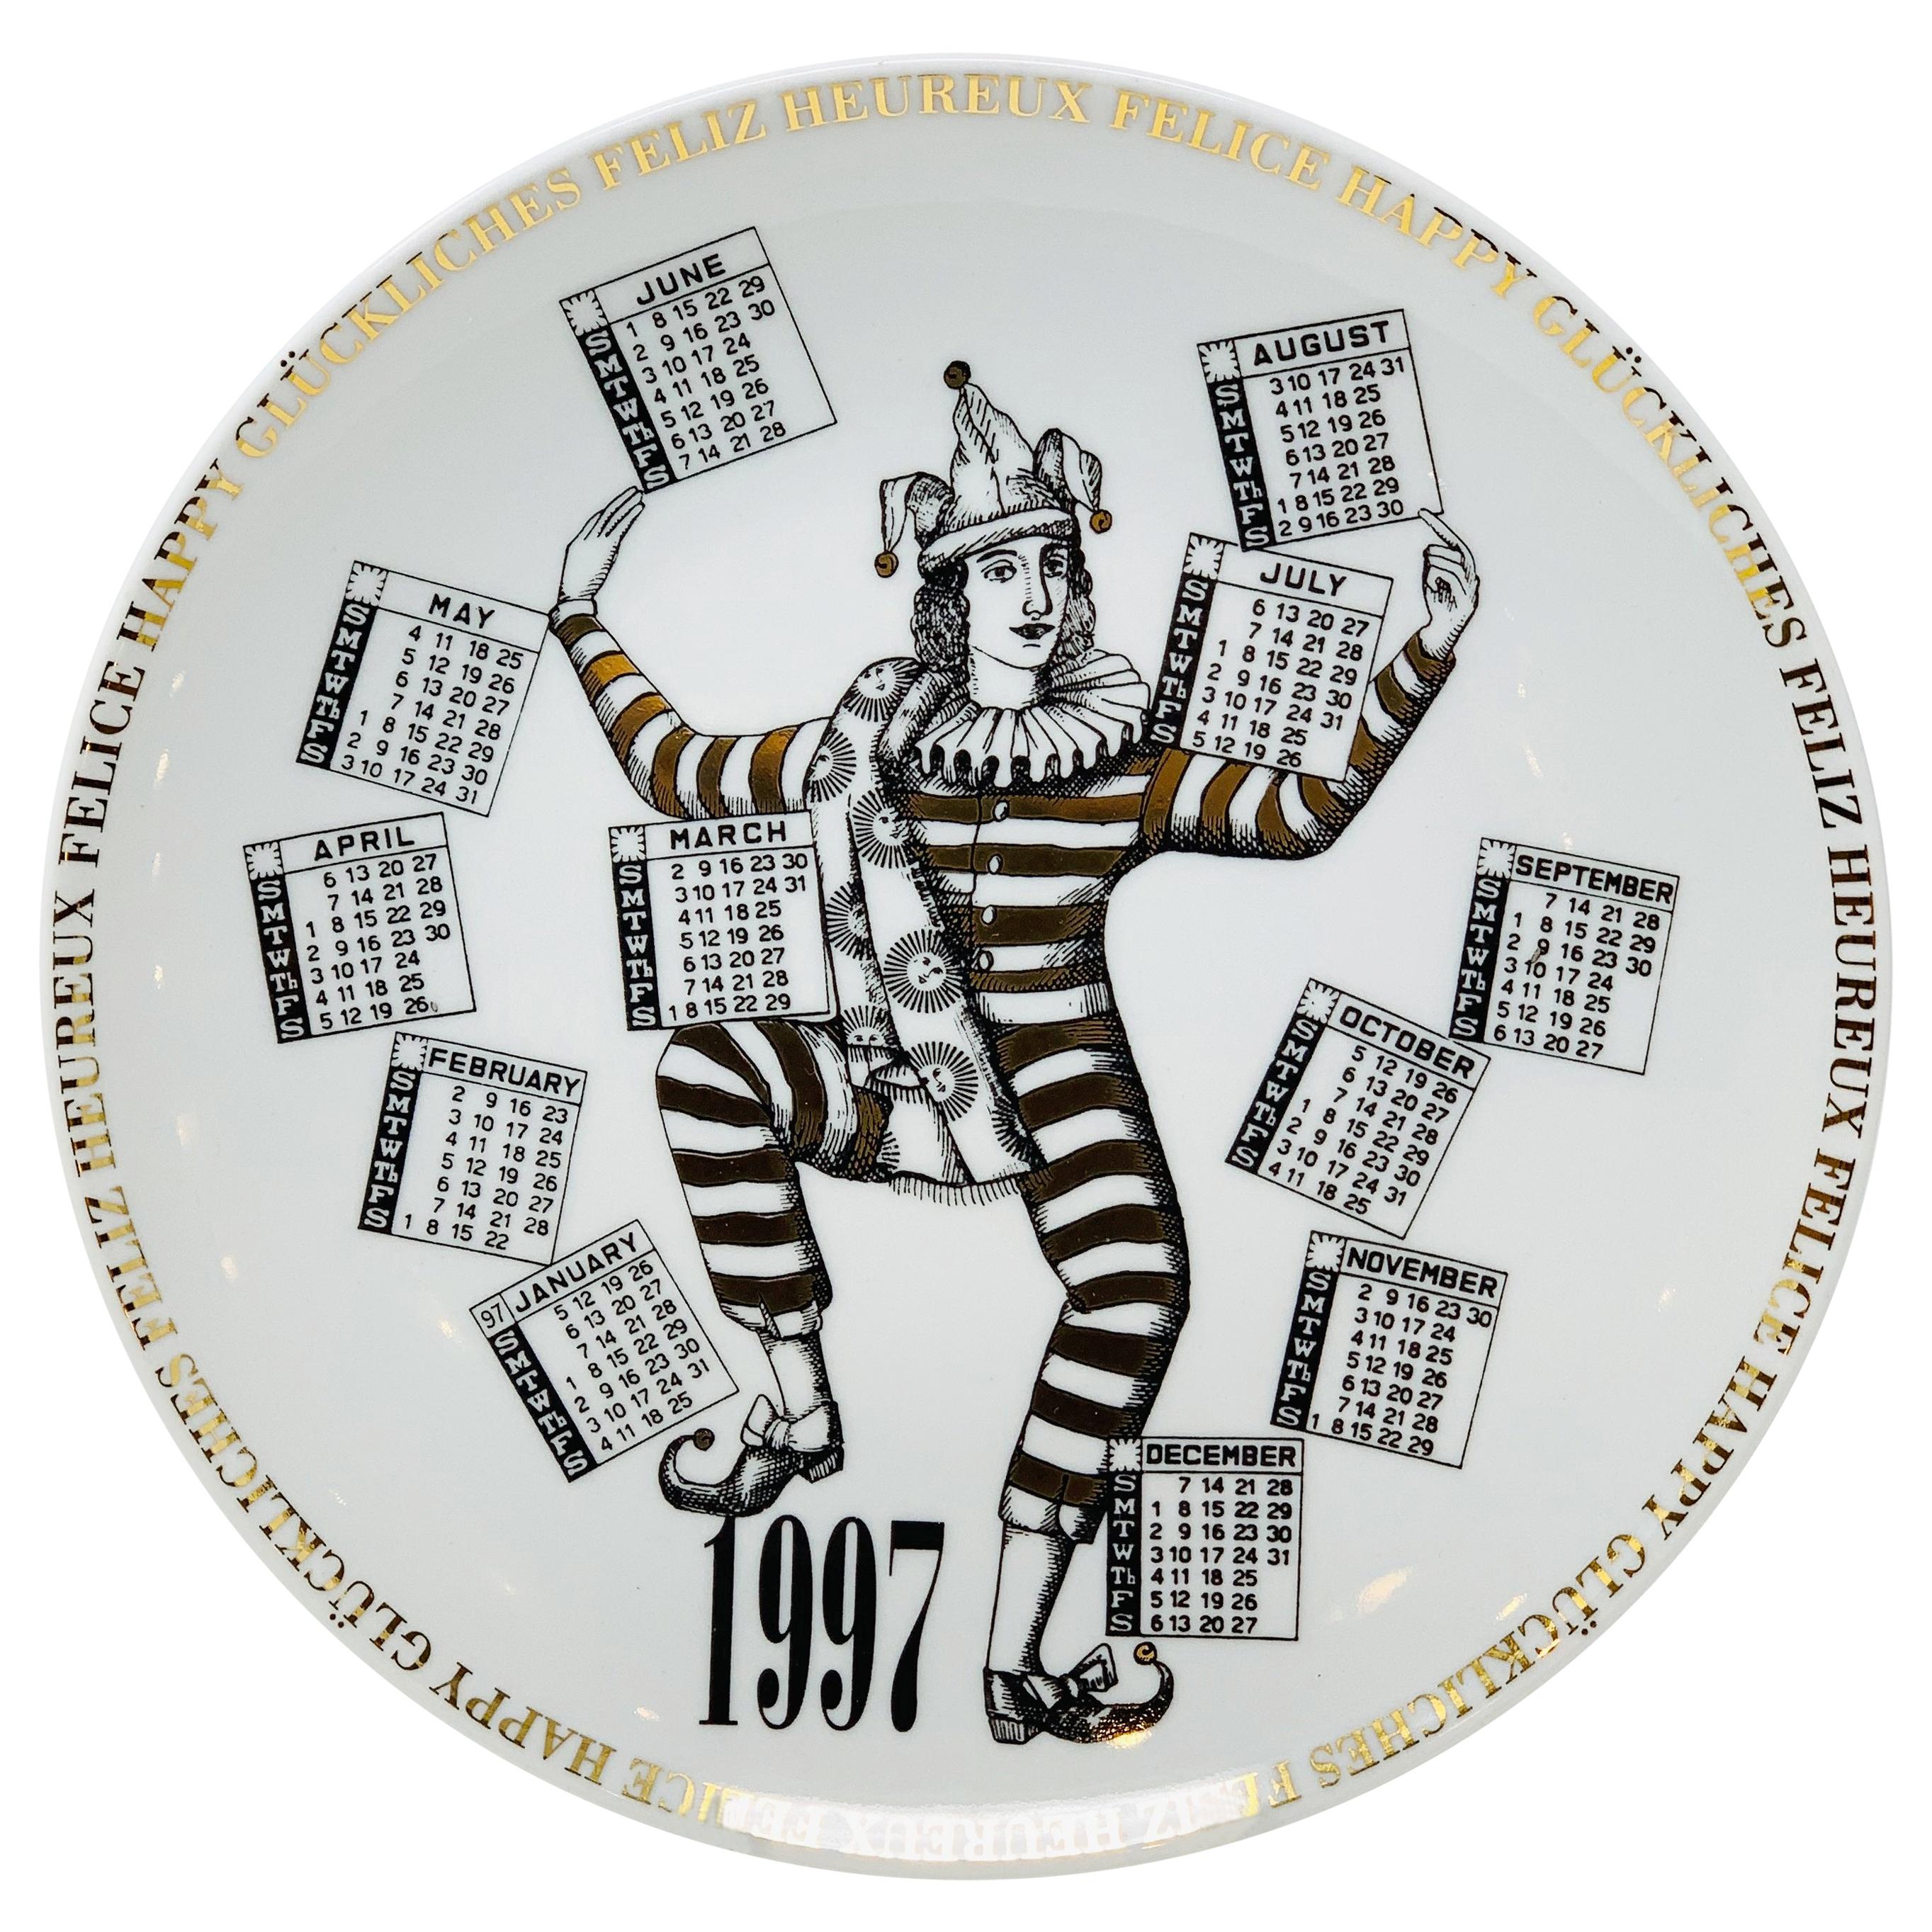 Piero Fornasetti Calendar Porcelain Plate for the Year 1997 For Sale